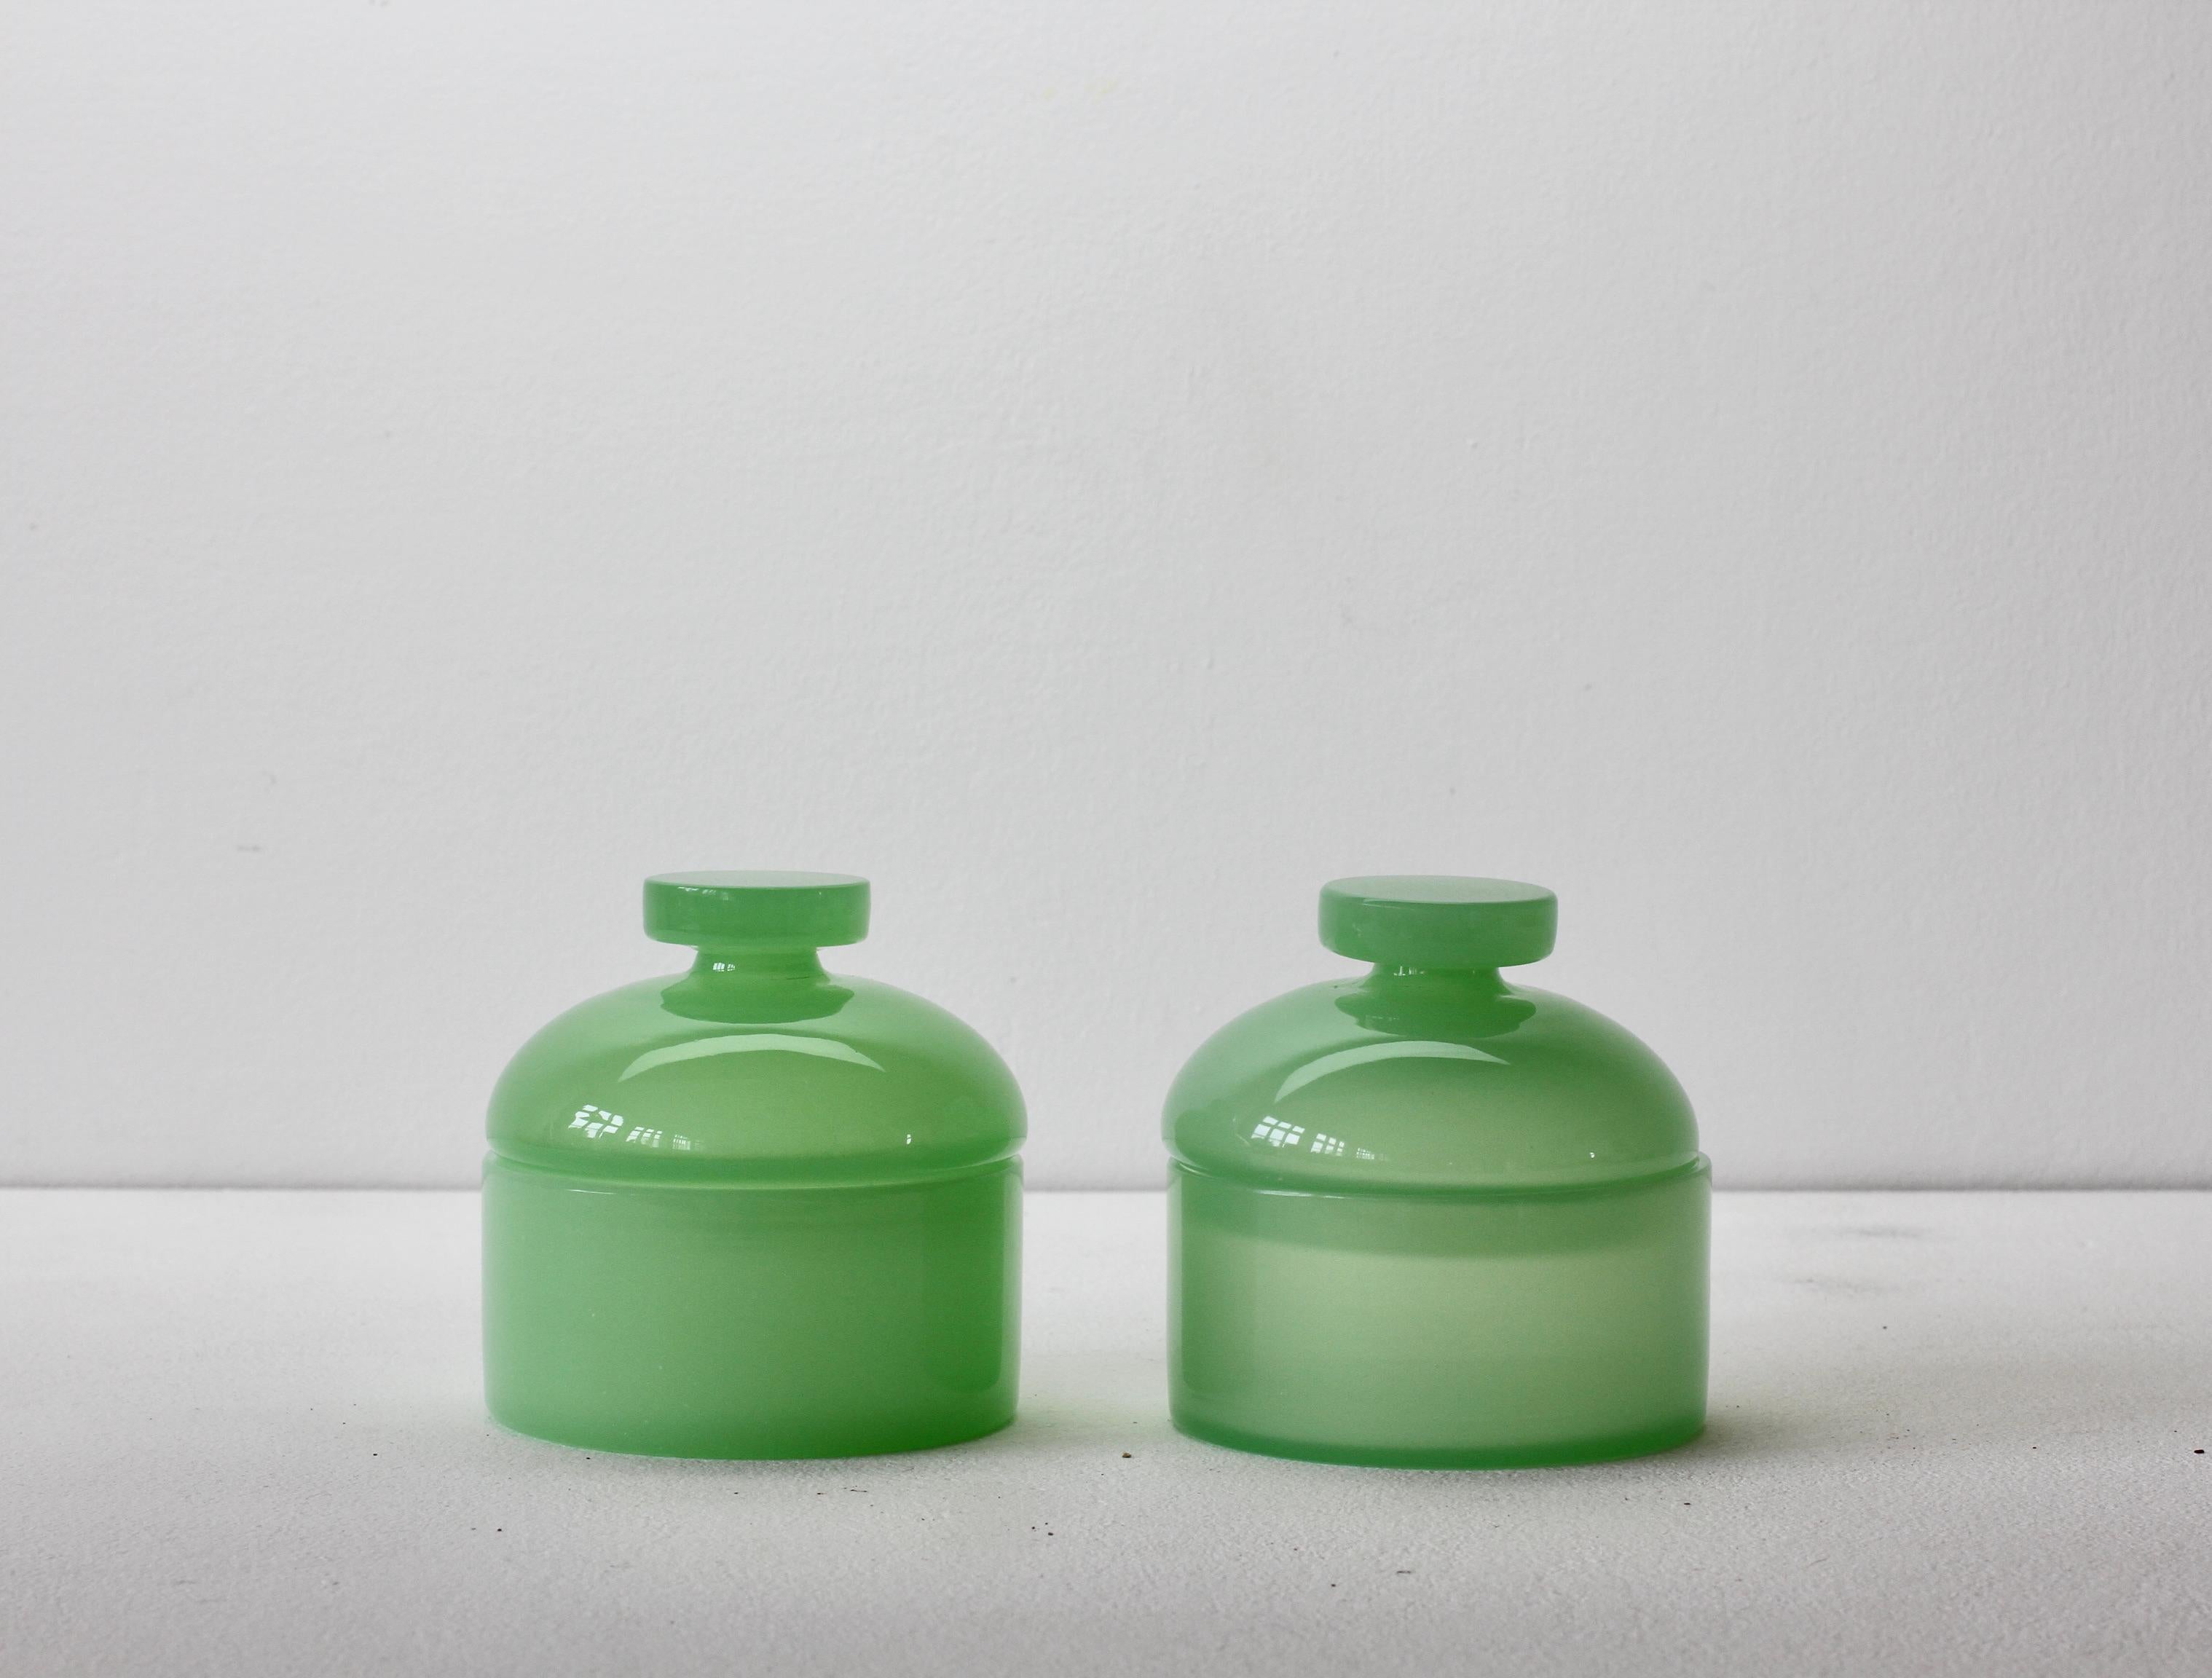 Cenedese vintage midcentury pair of new old stock Murano opaline green colored / coloured glass round Apothecary jars or storage containers with lids made circa 1970 with original paper labels attached. Wonderful Italian glass and perfect for